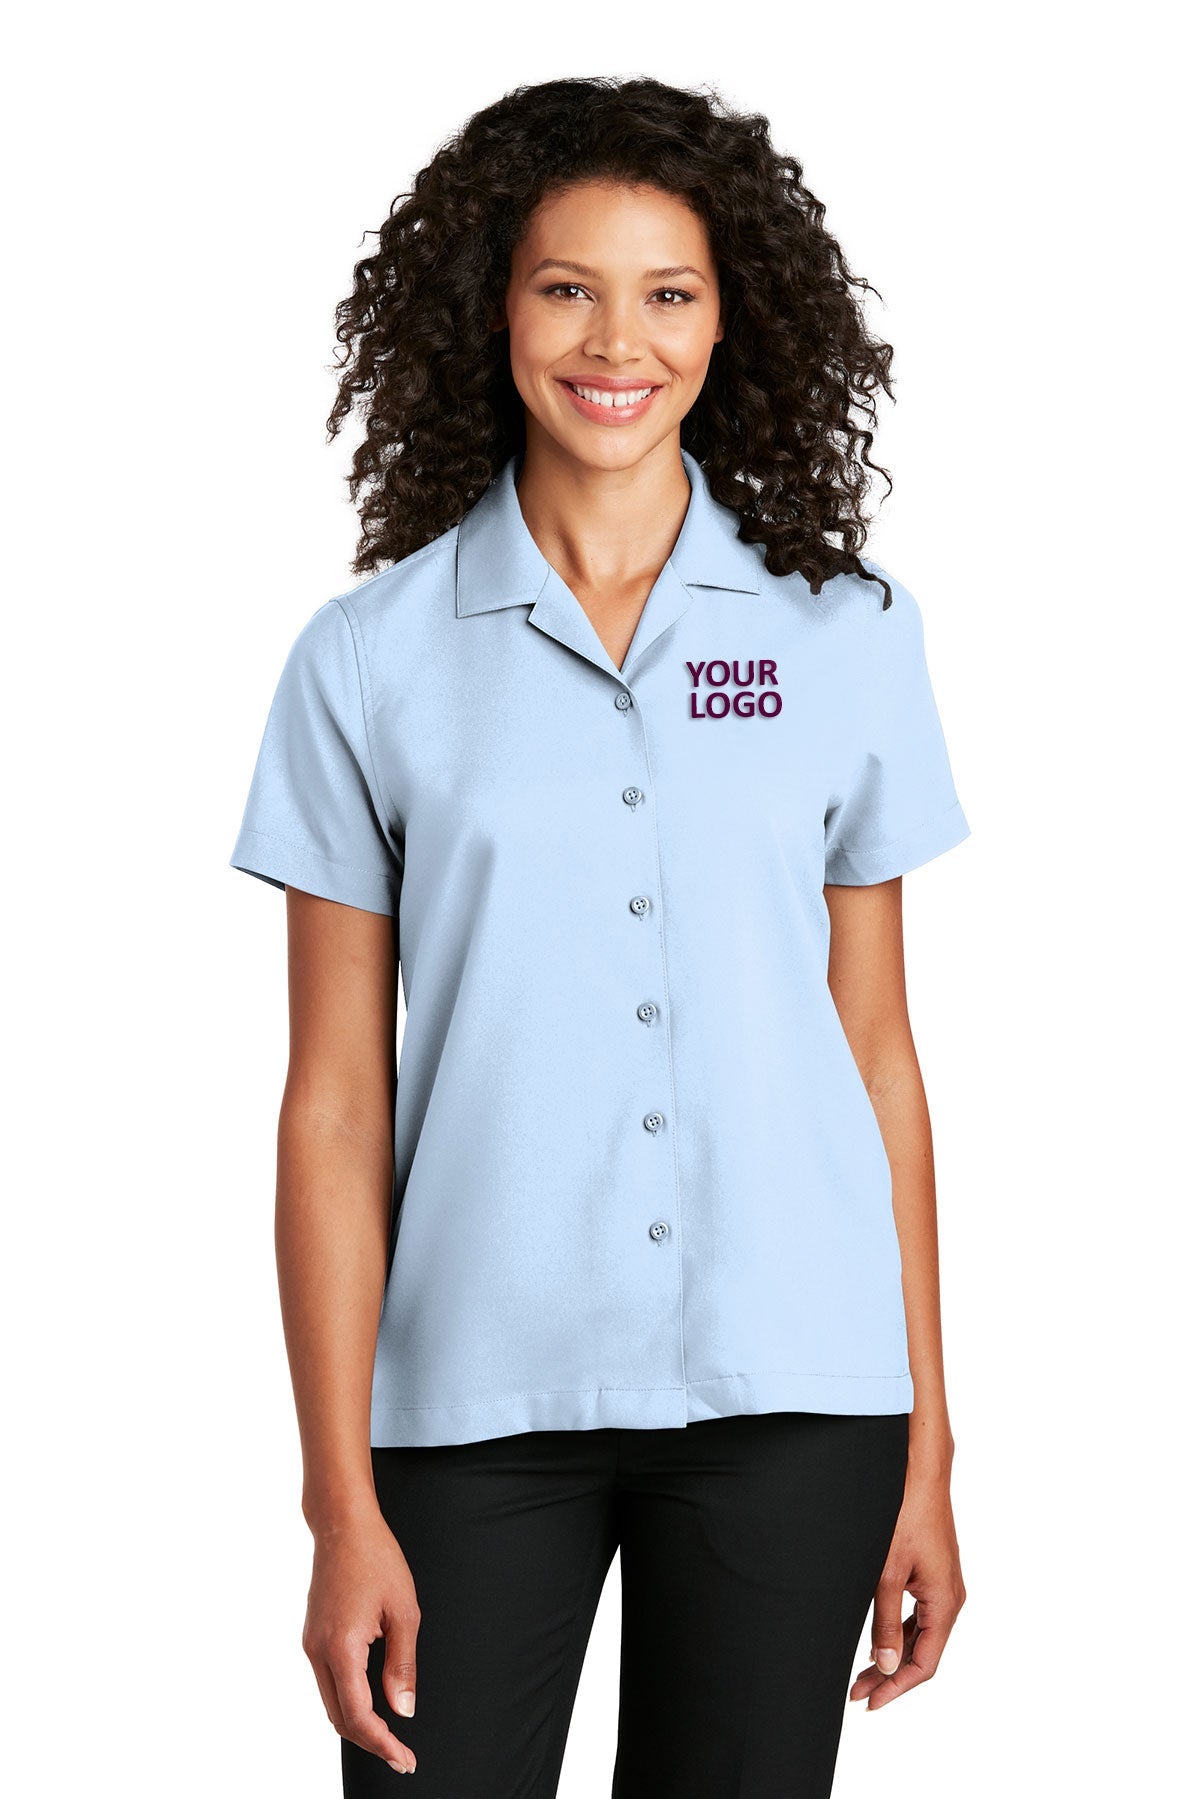 Port Authority Cloud Blue LW400 custom embroidered shirts